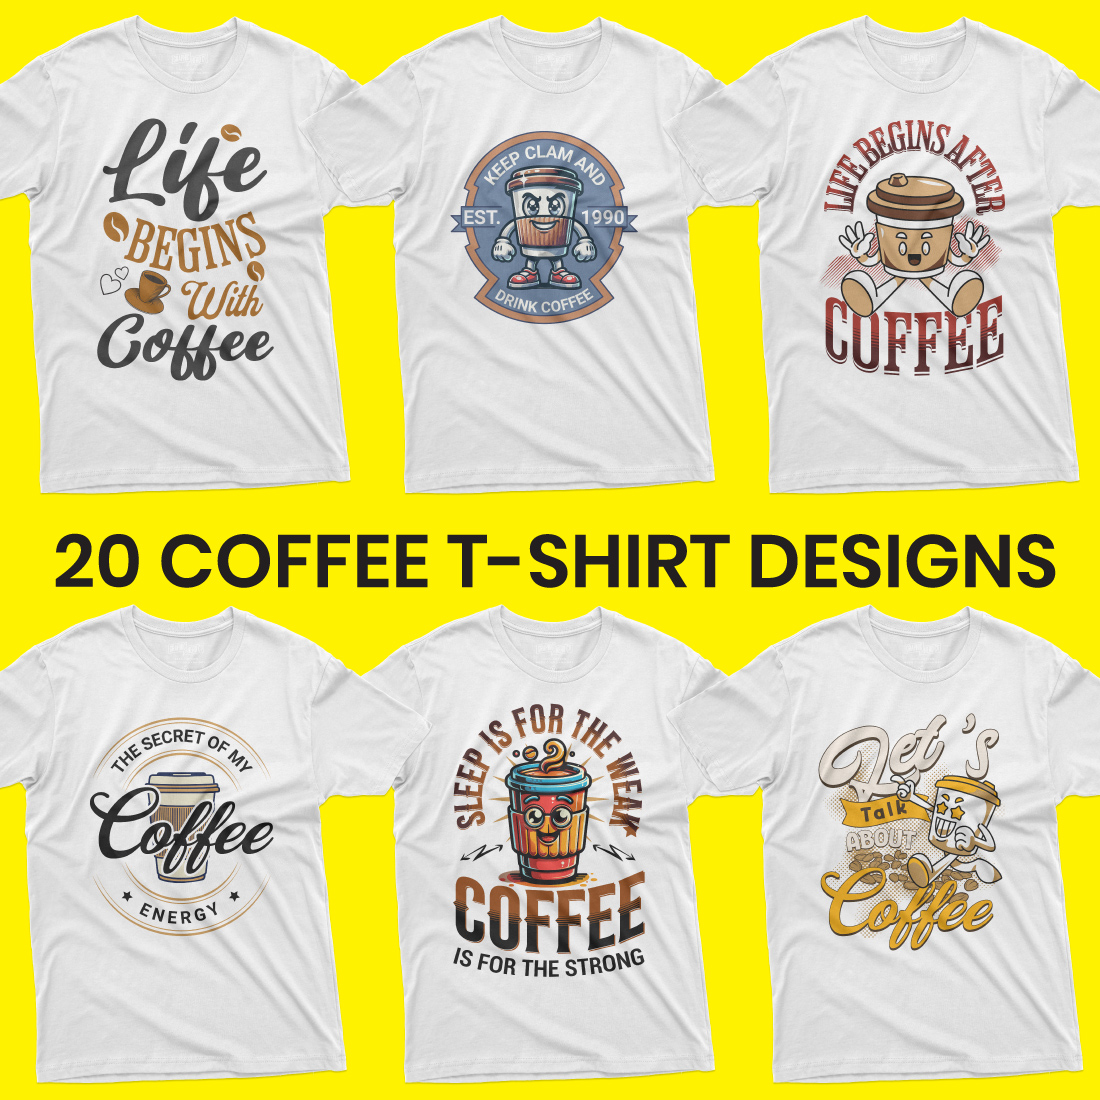 20 Coffee T-Shirt Designs cover image.